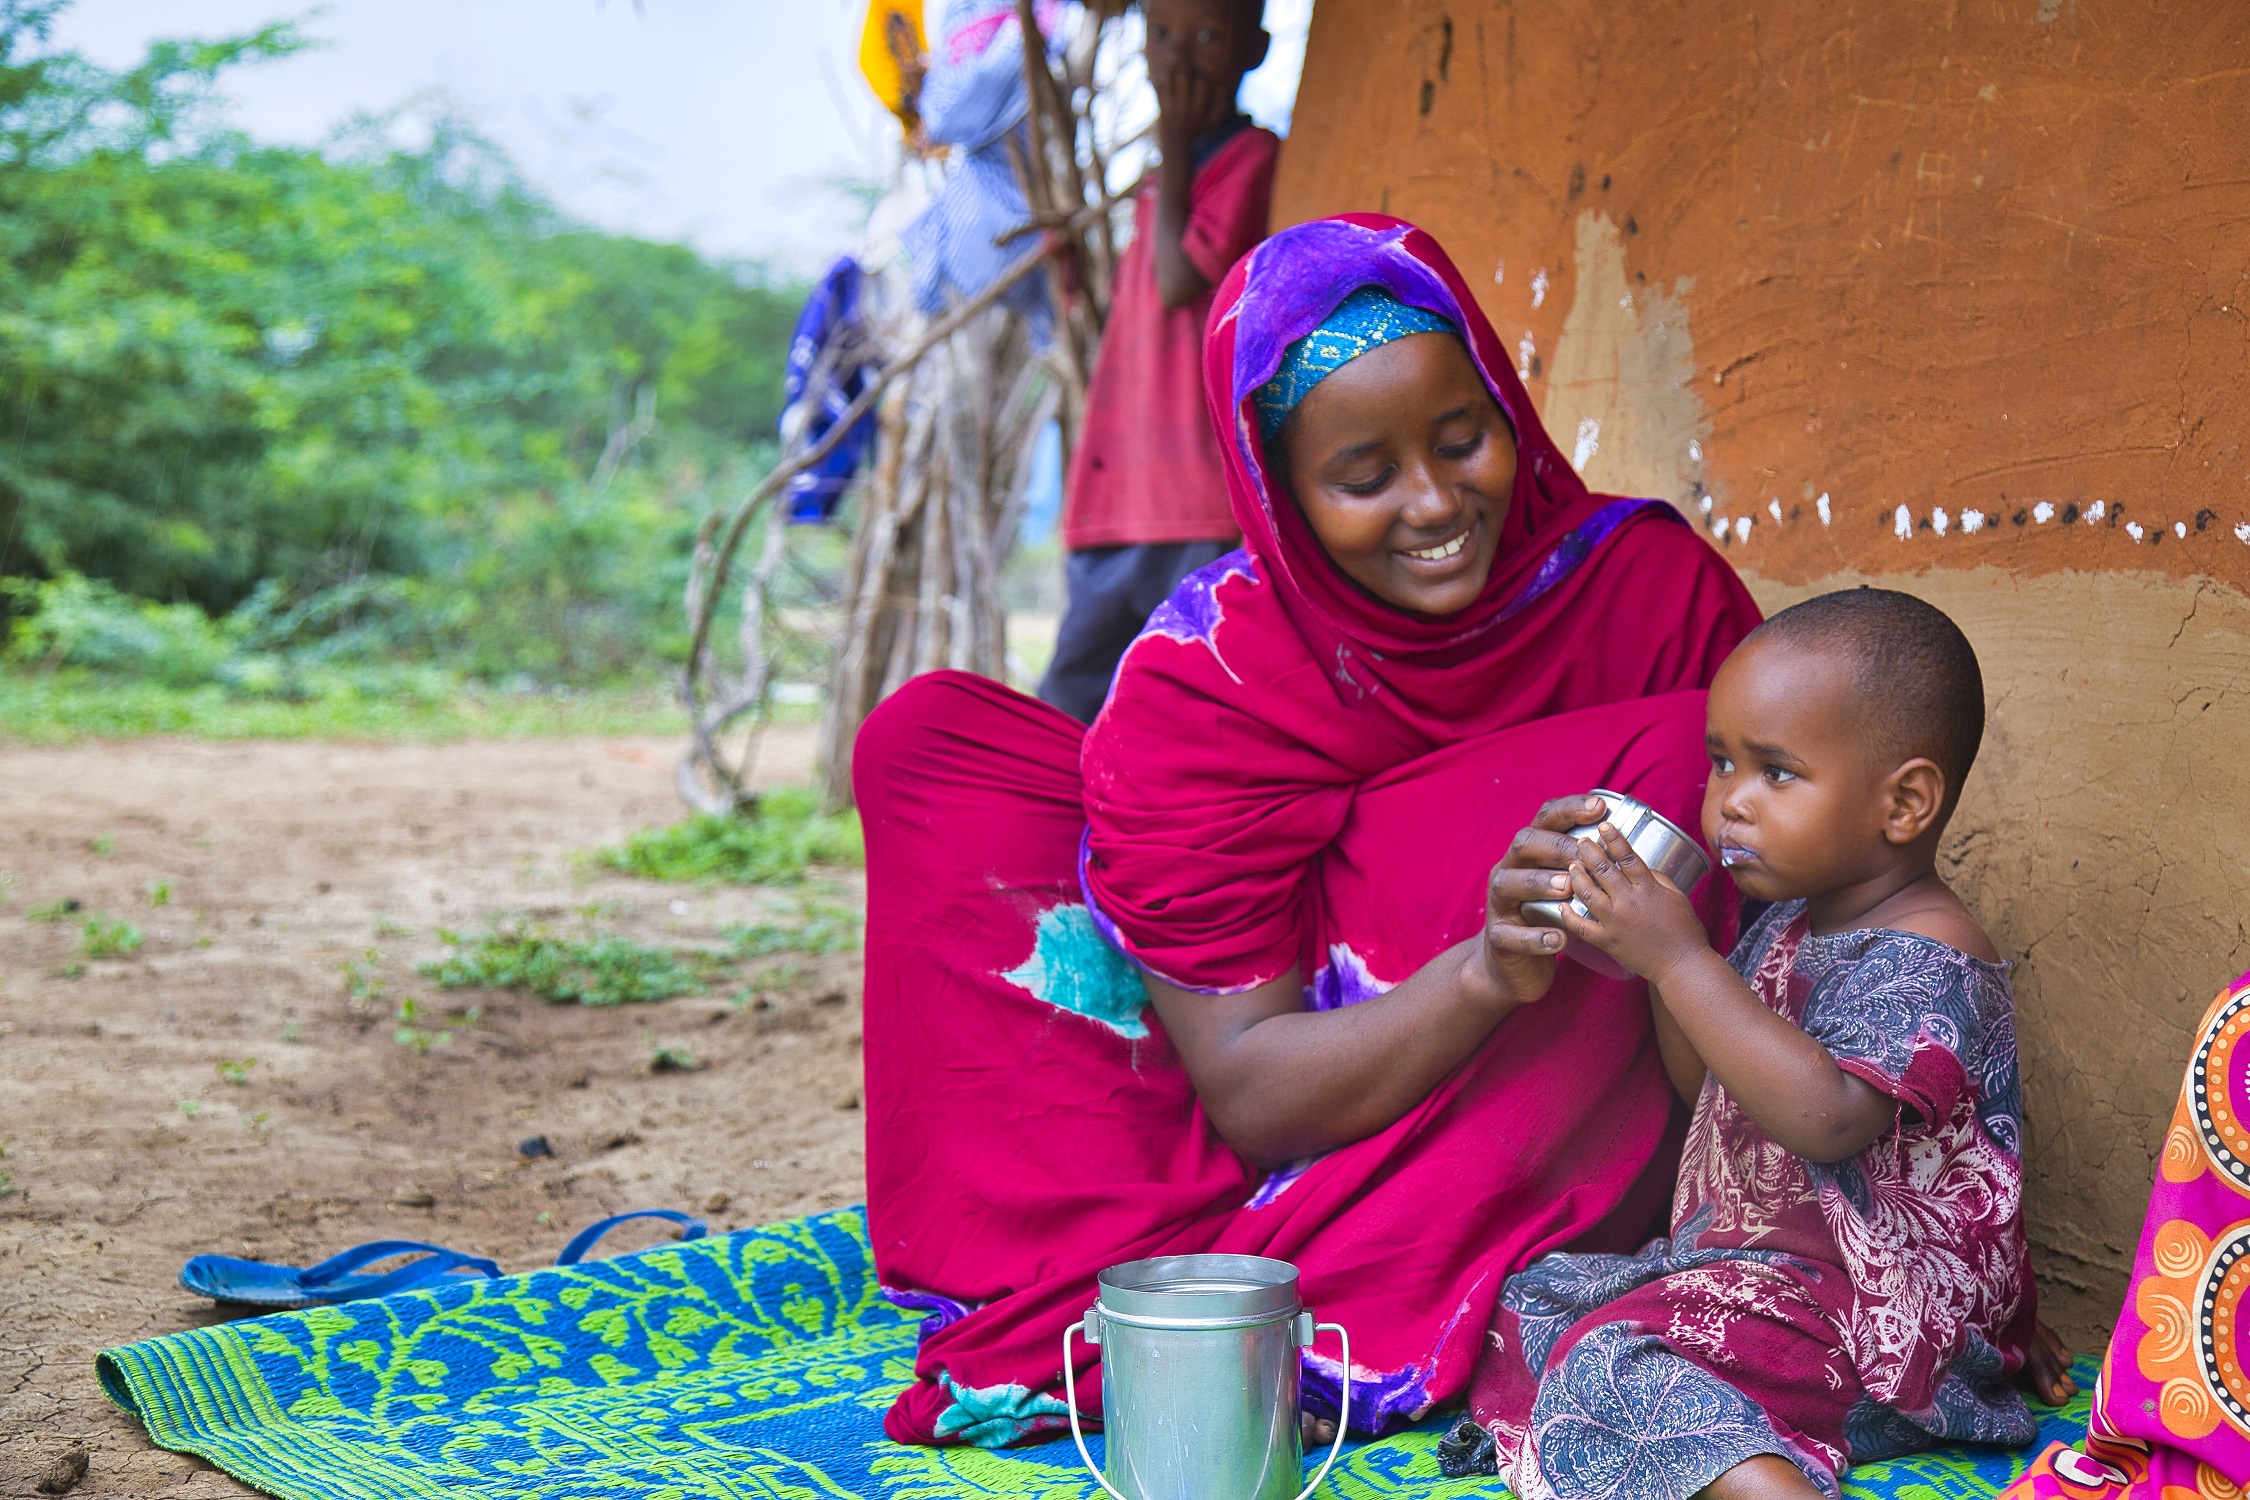 Amina and her family have been transformed with this World Vision project